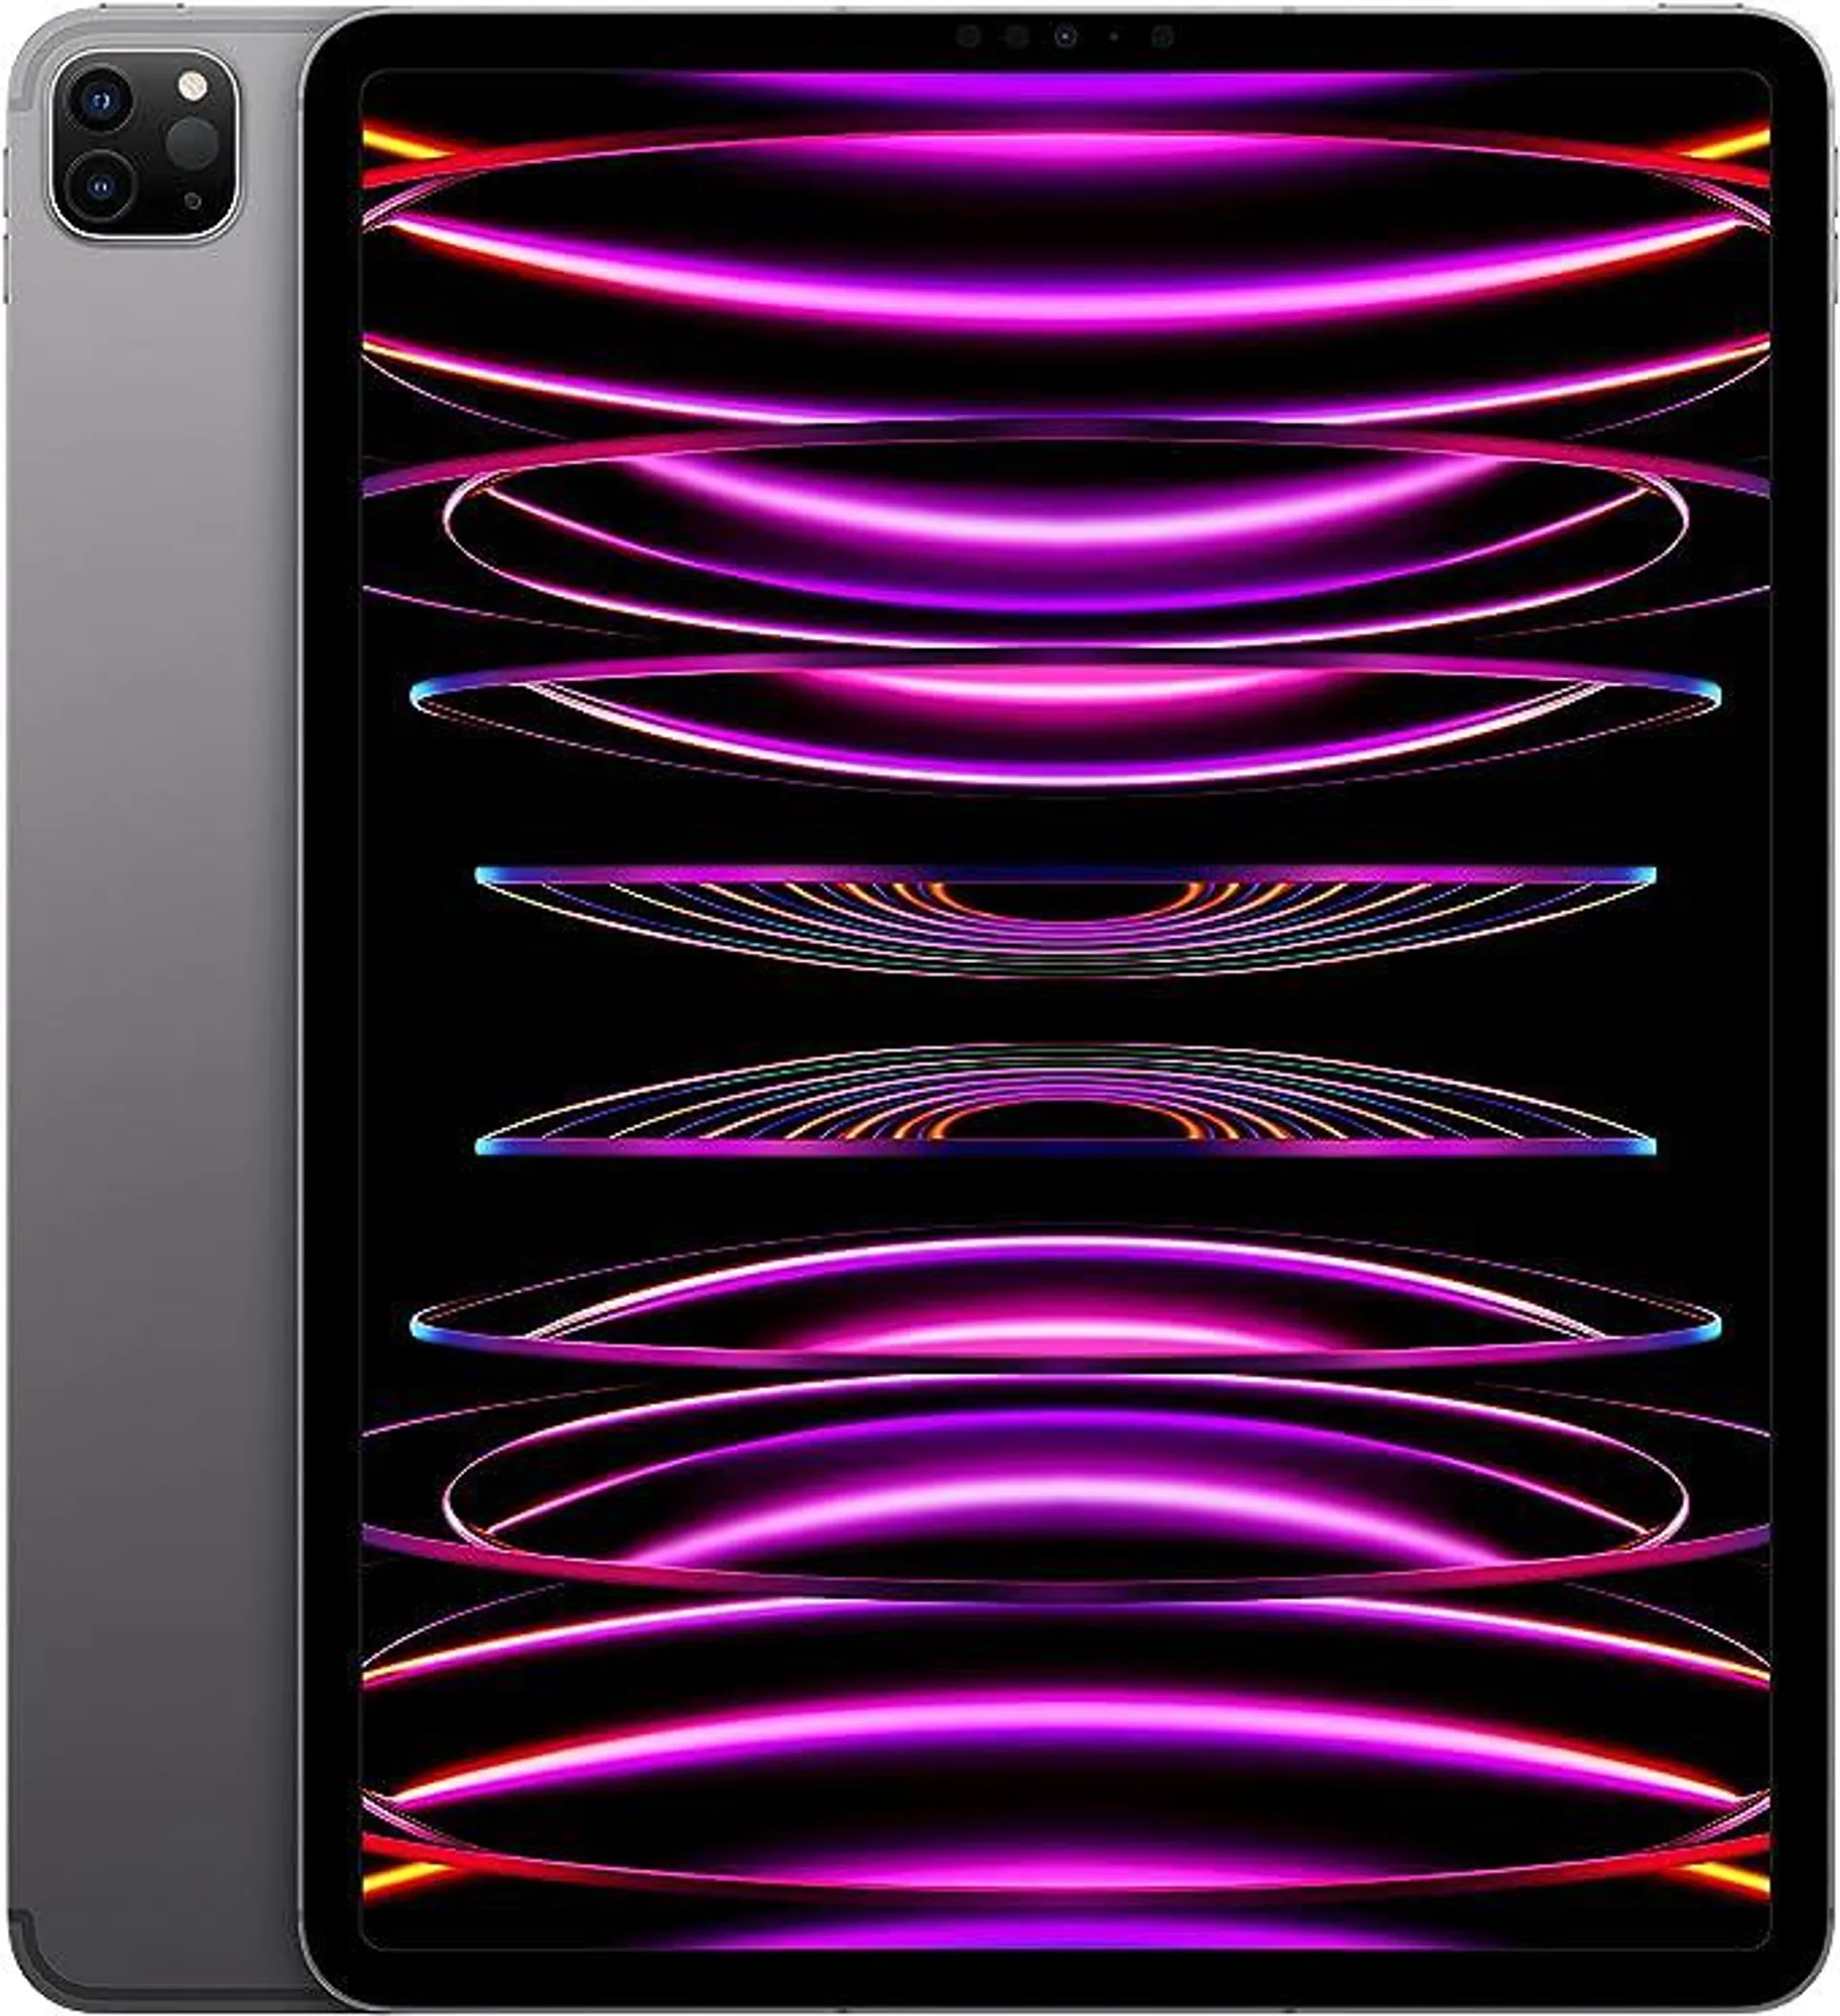 Apple iPad Pro 12.9-inch (6th Generation): with M2 chip, Liquid Retina XDR Display, 512GB, Wi-Fi 6E + 5G Cellular, 12MP front/12MP and 10MP Back Cameras, Face ID, All-Day Battery Life – Space Gray